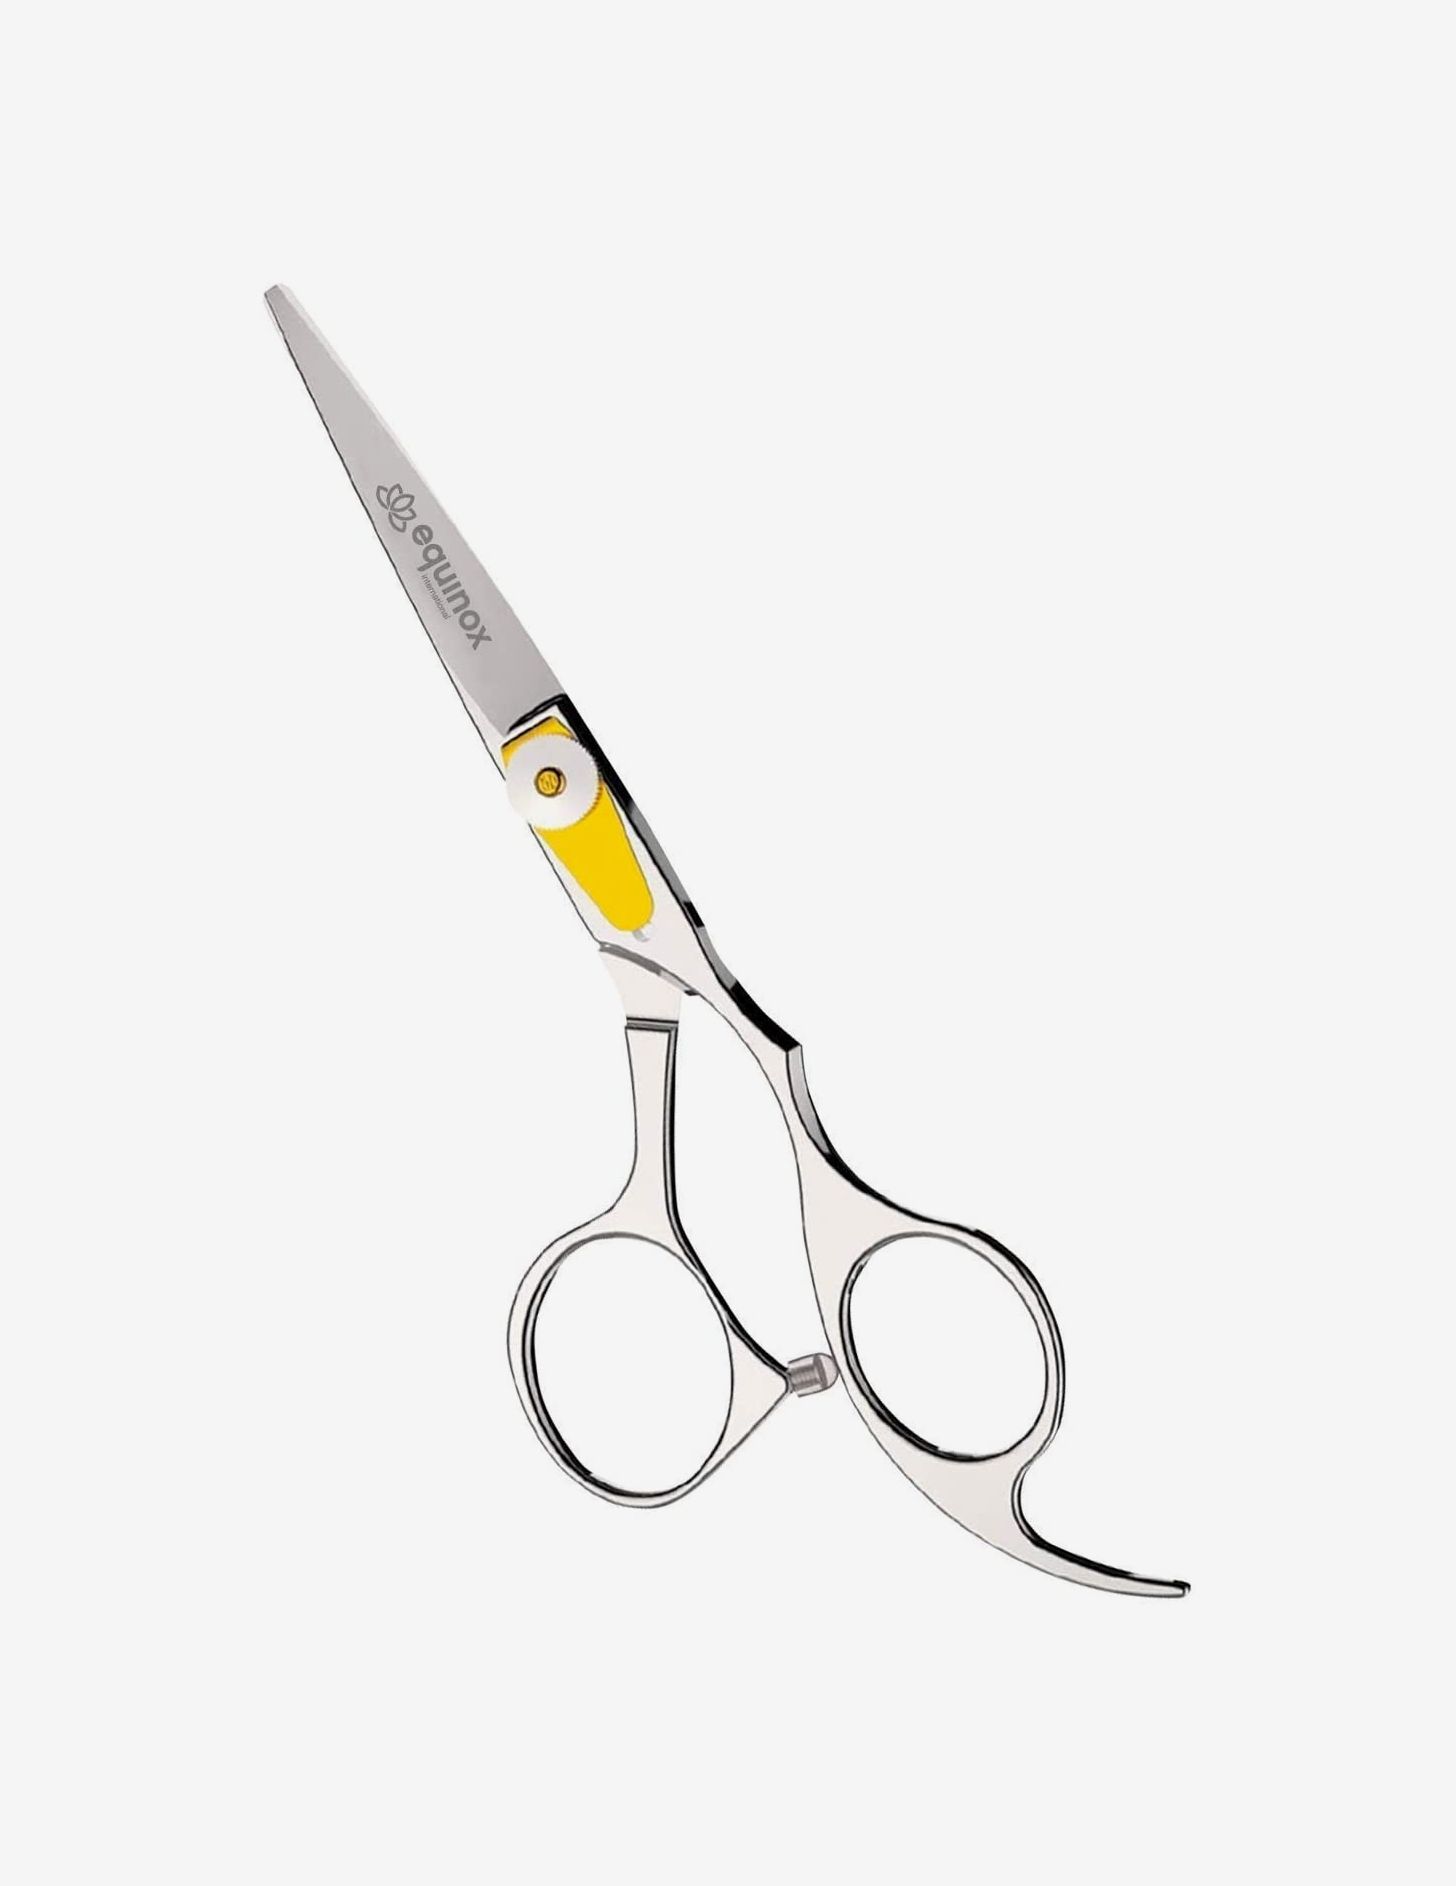 7 Best Tools For Cutting Women's Hair At Home 2020 | The Strategist